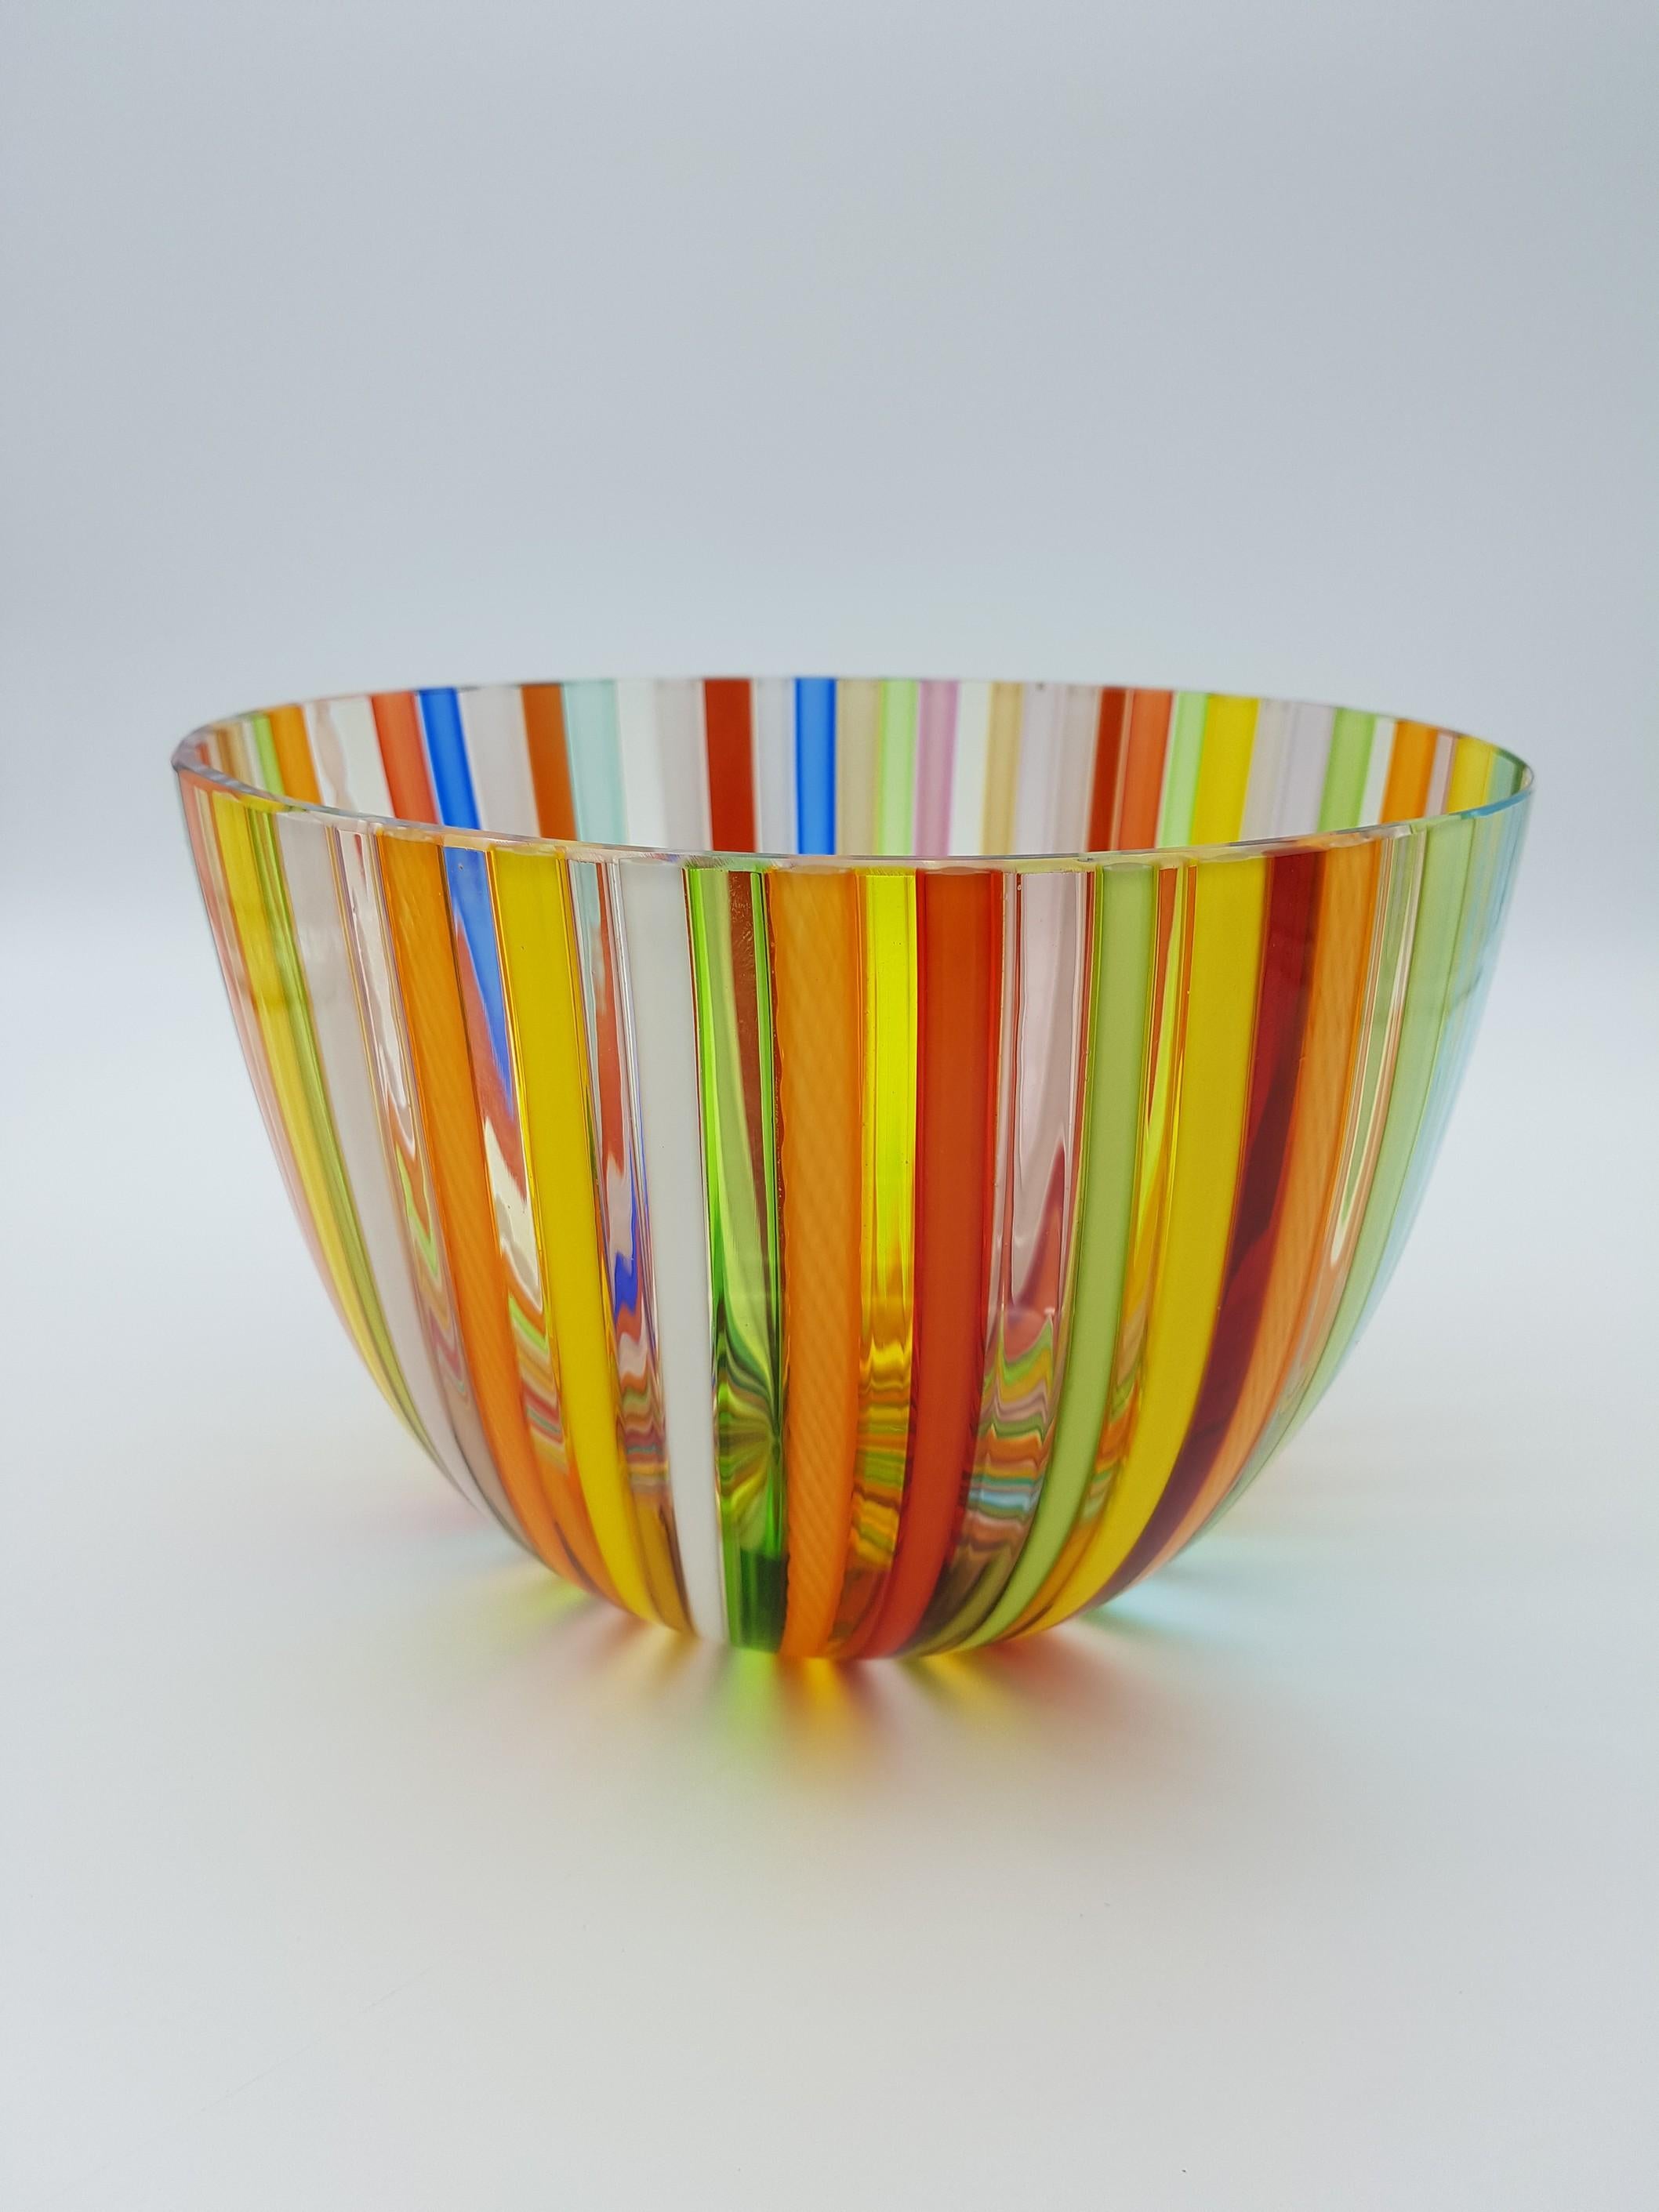 Hand-Crafted Modern Murano Glass Bowl Centerpiece, Bright Rainbow Colors by Cenedese, 1998 For Sale